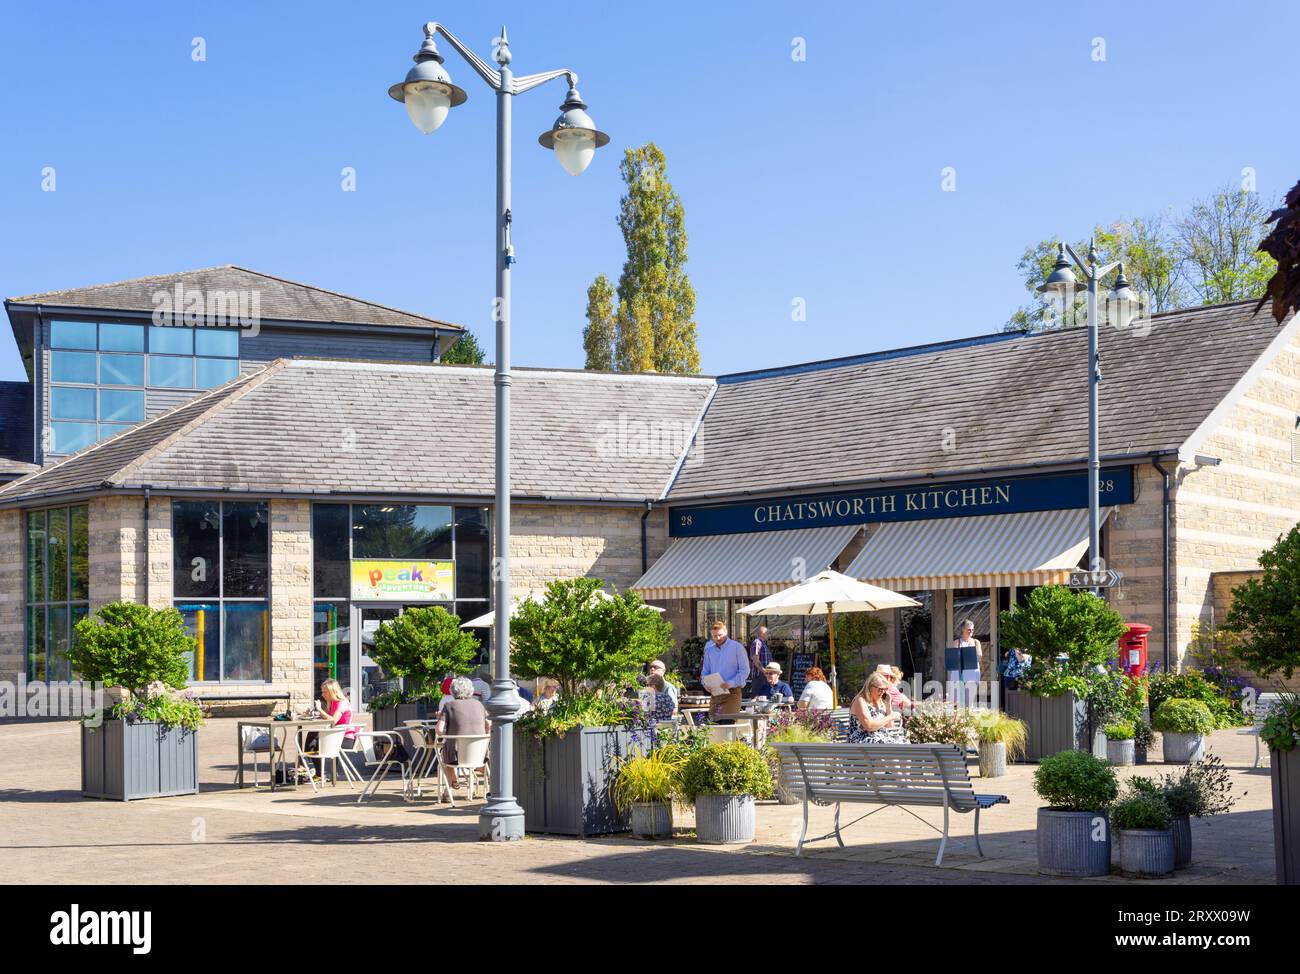 Rowsley Derbyshire Chatsworth Kitchen cafe and gift shop in the outlet Peak shopping Village Rowsley Derbyshire Dales Derbyshire England UK GB Europe Stock Photo